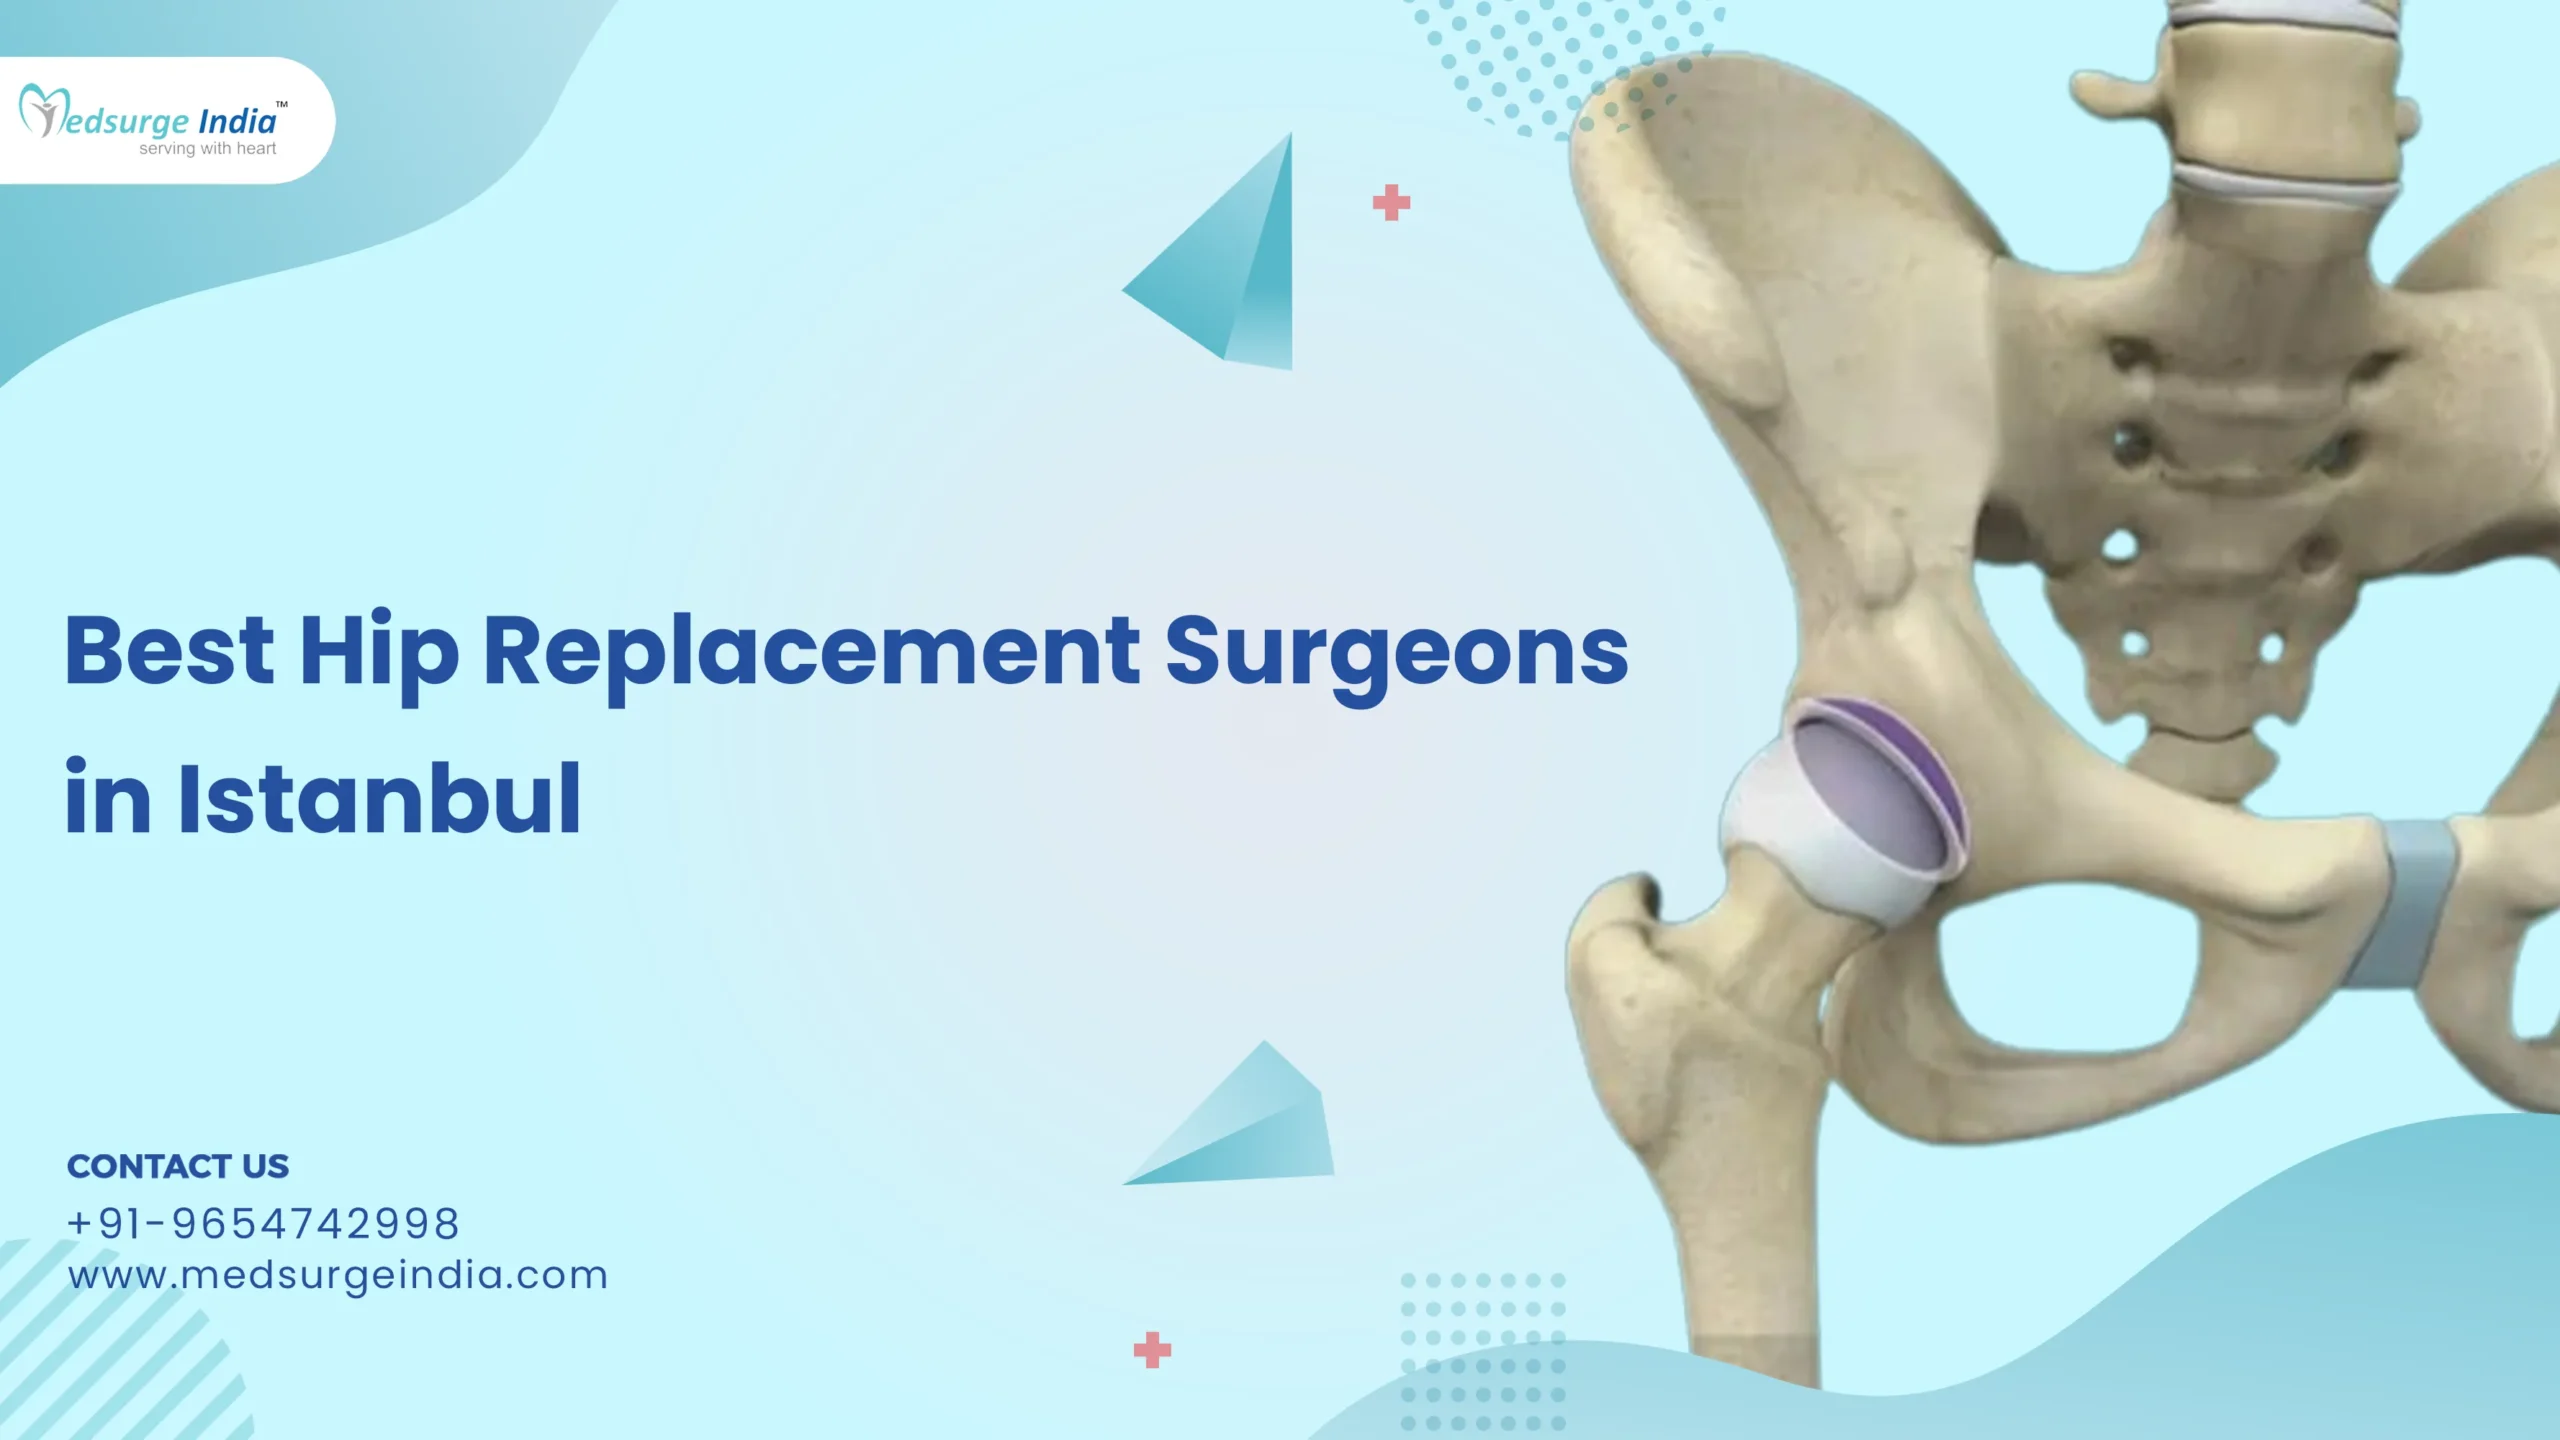 Best Hip Replacement Surgeons in Istanbul